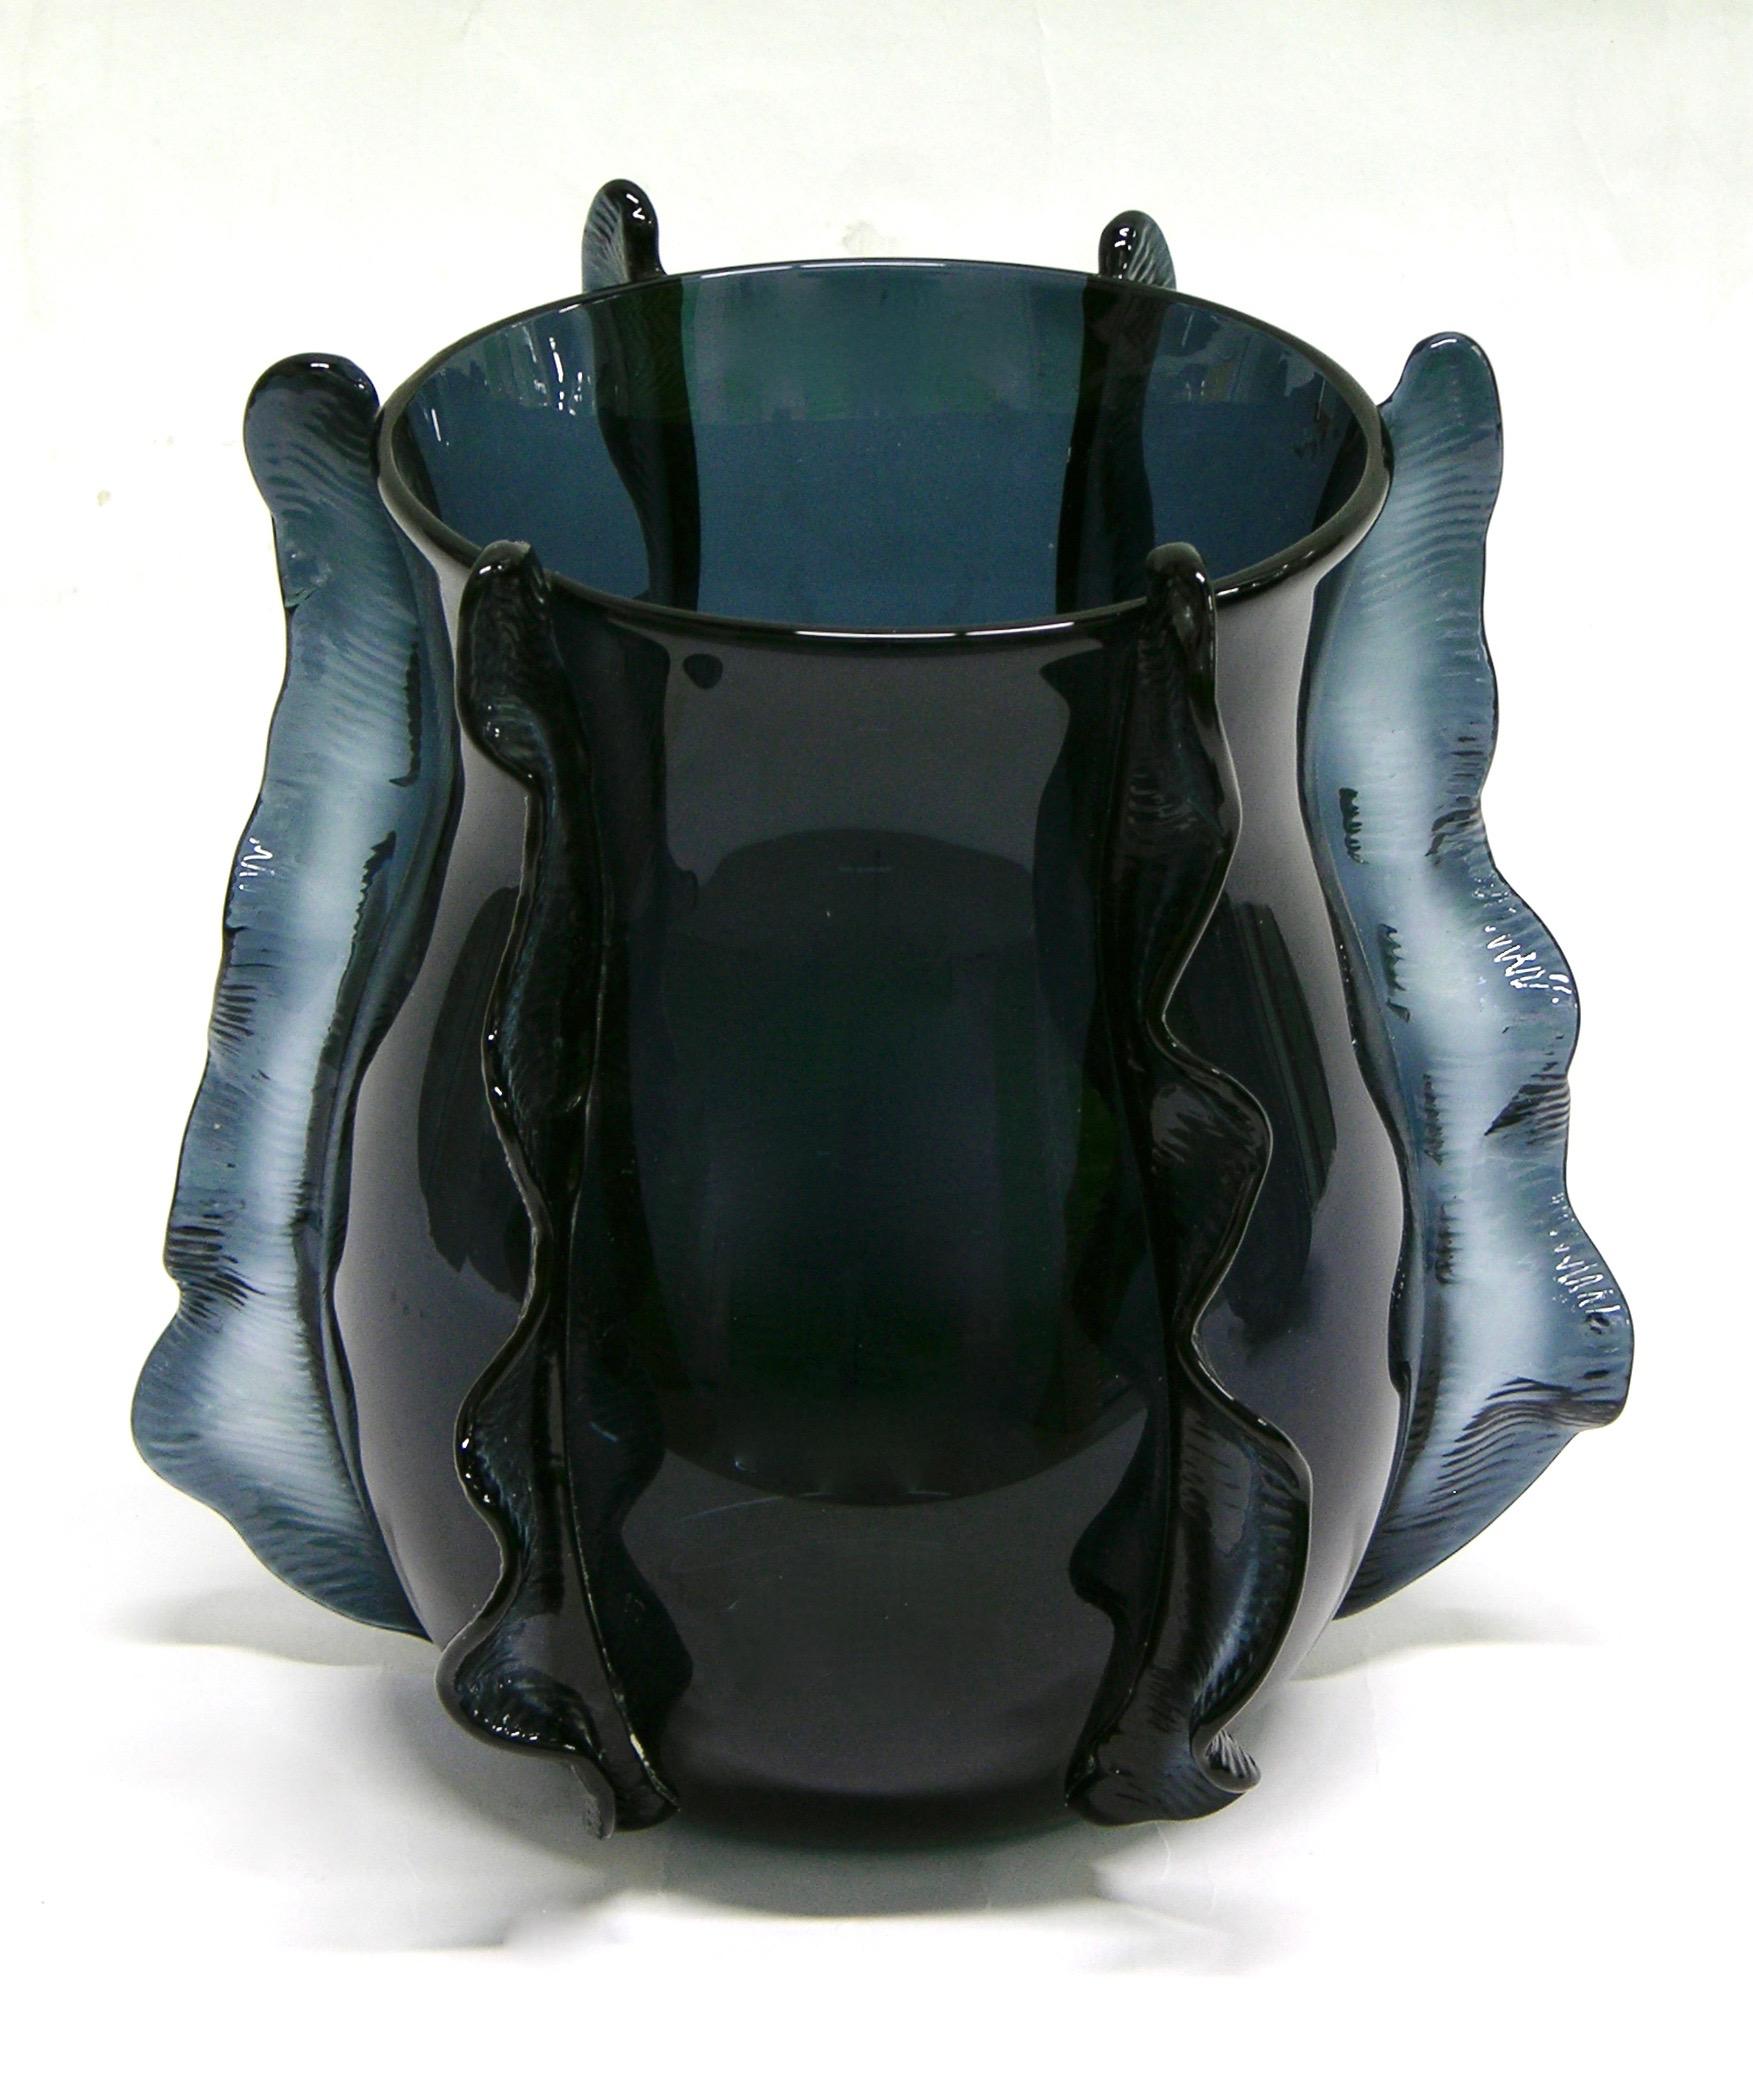 A Venetian organic vase in blown Murano glass, created in a very rare avio navy blue color, the curved shape sensually enhanced with waved handcrafted incised decorations in relief, like frills in motion that embrace and lift the design. Signed